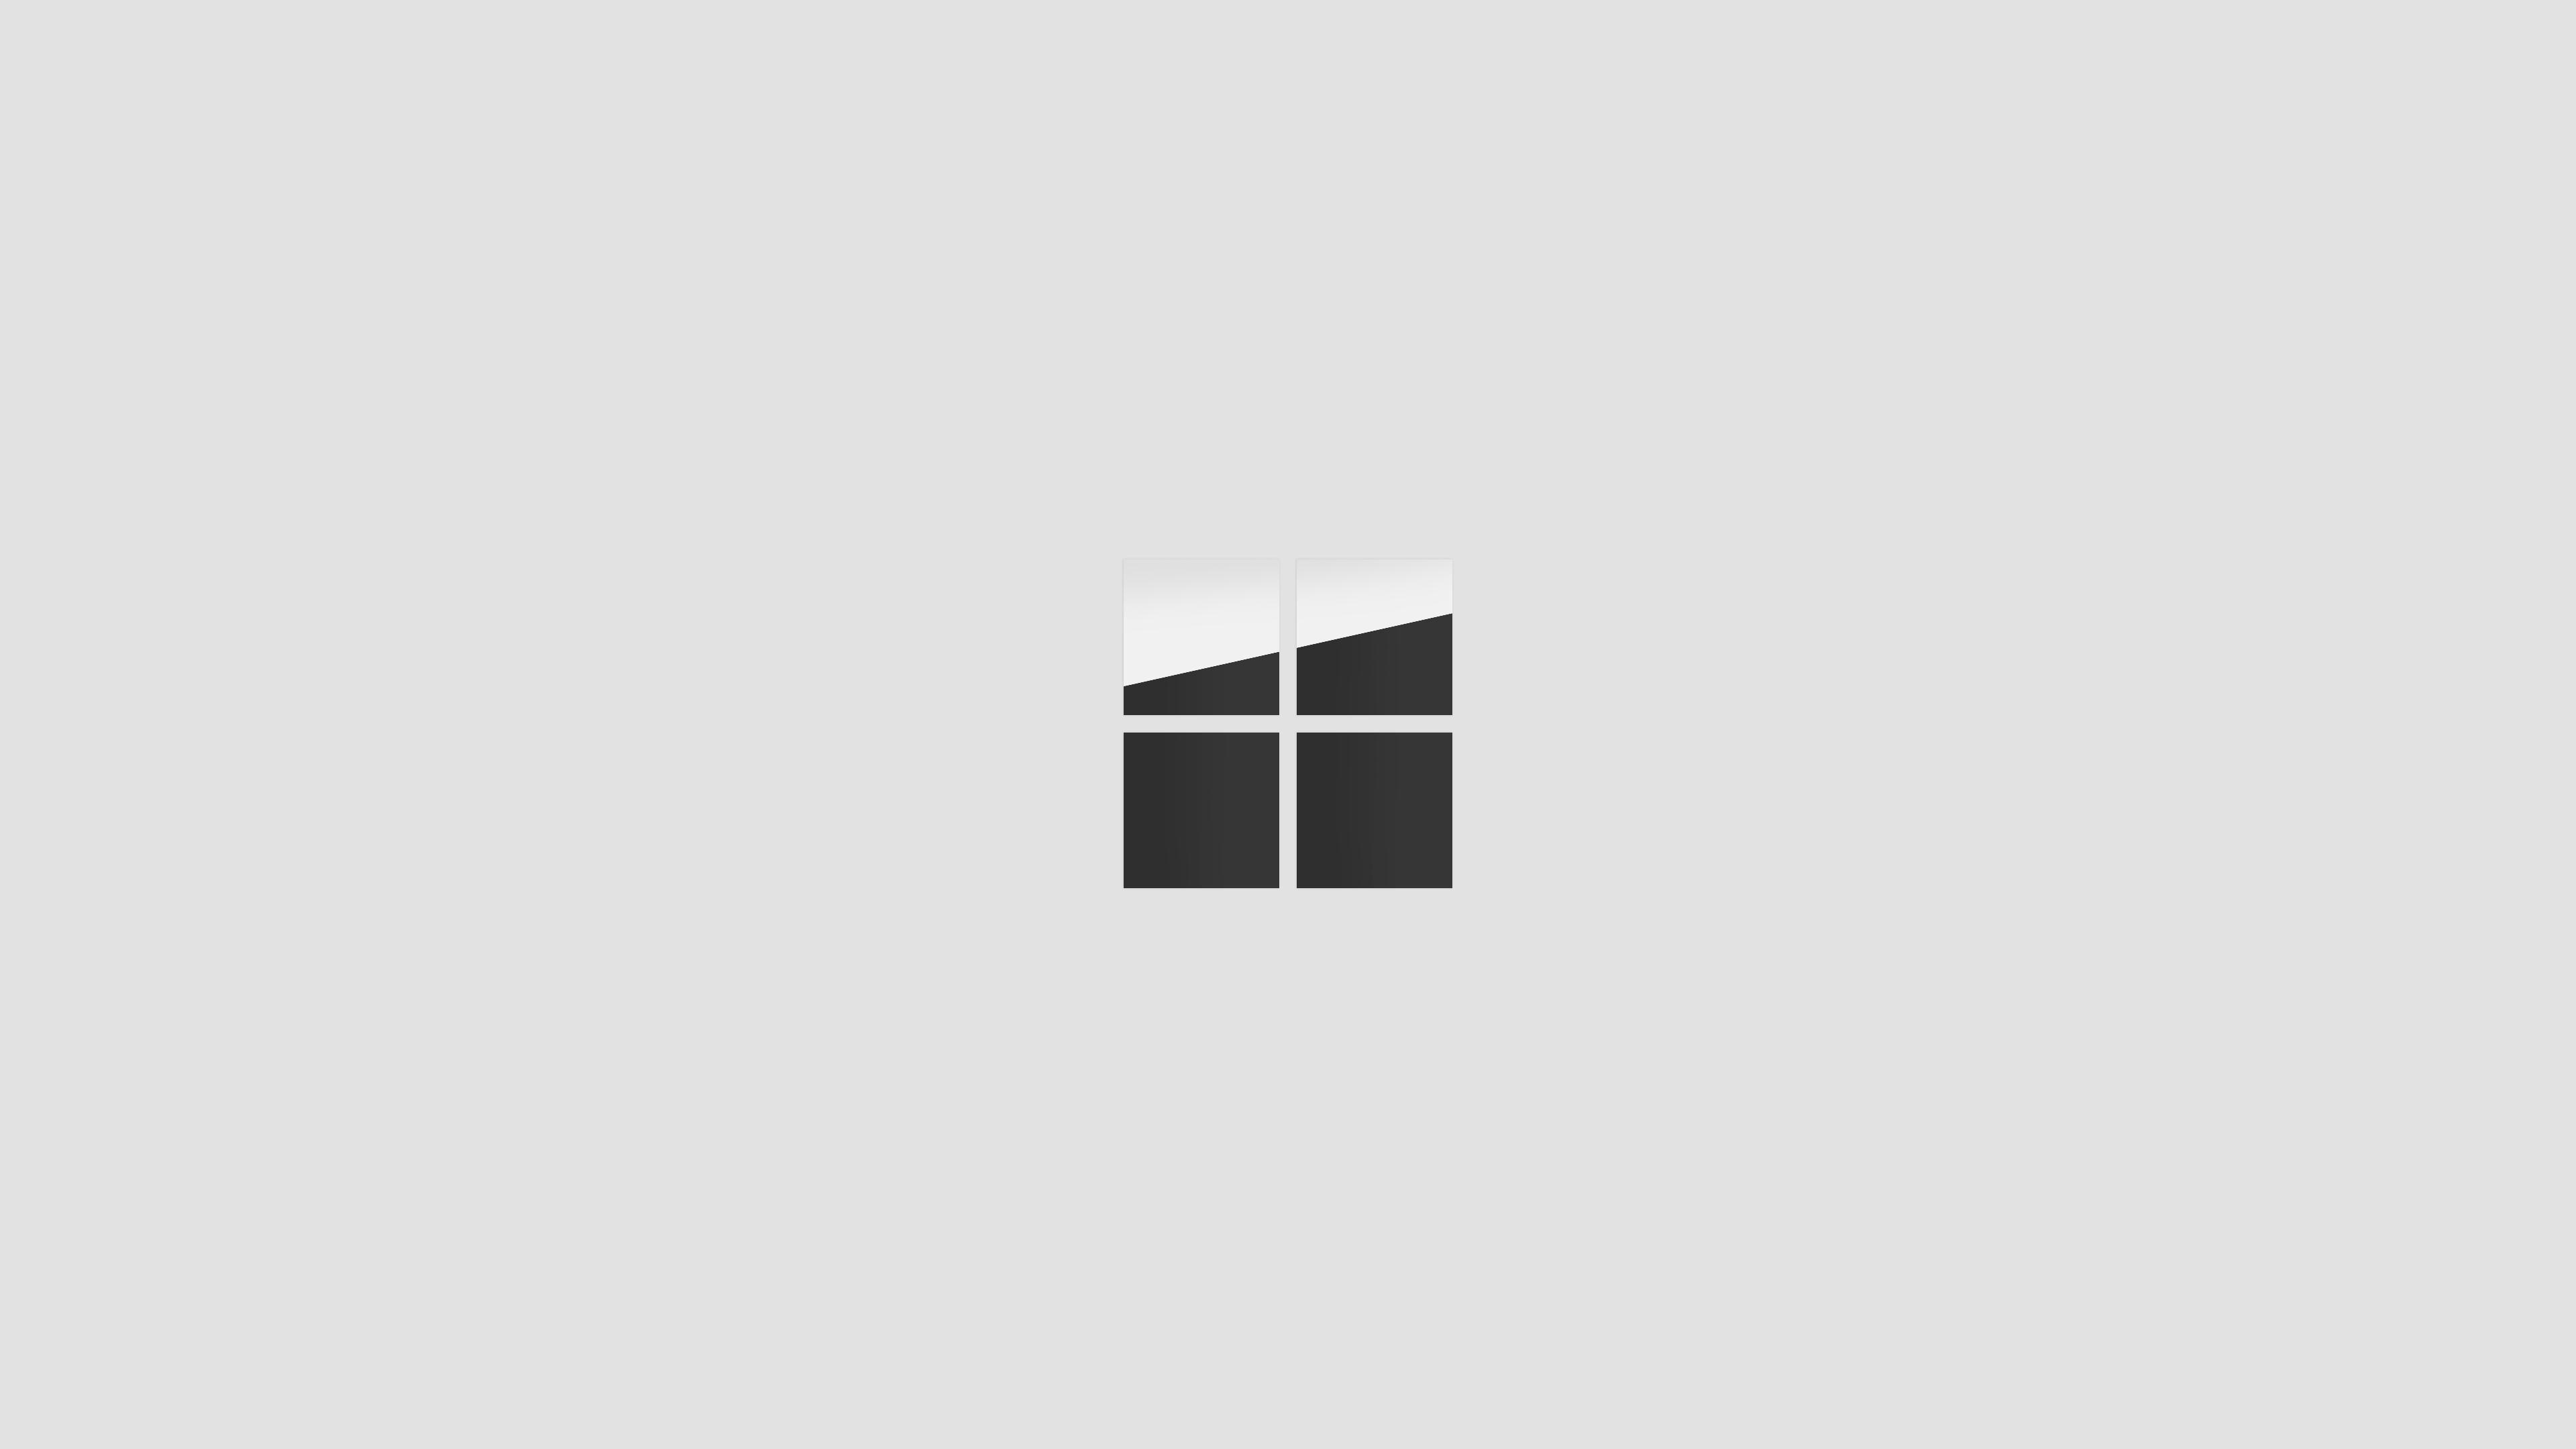 New Microsoft Surface Logo - Have made a 4K adapted version of Microsoft Surface logo which is ...